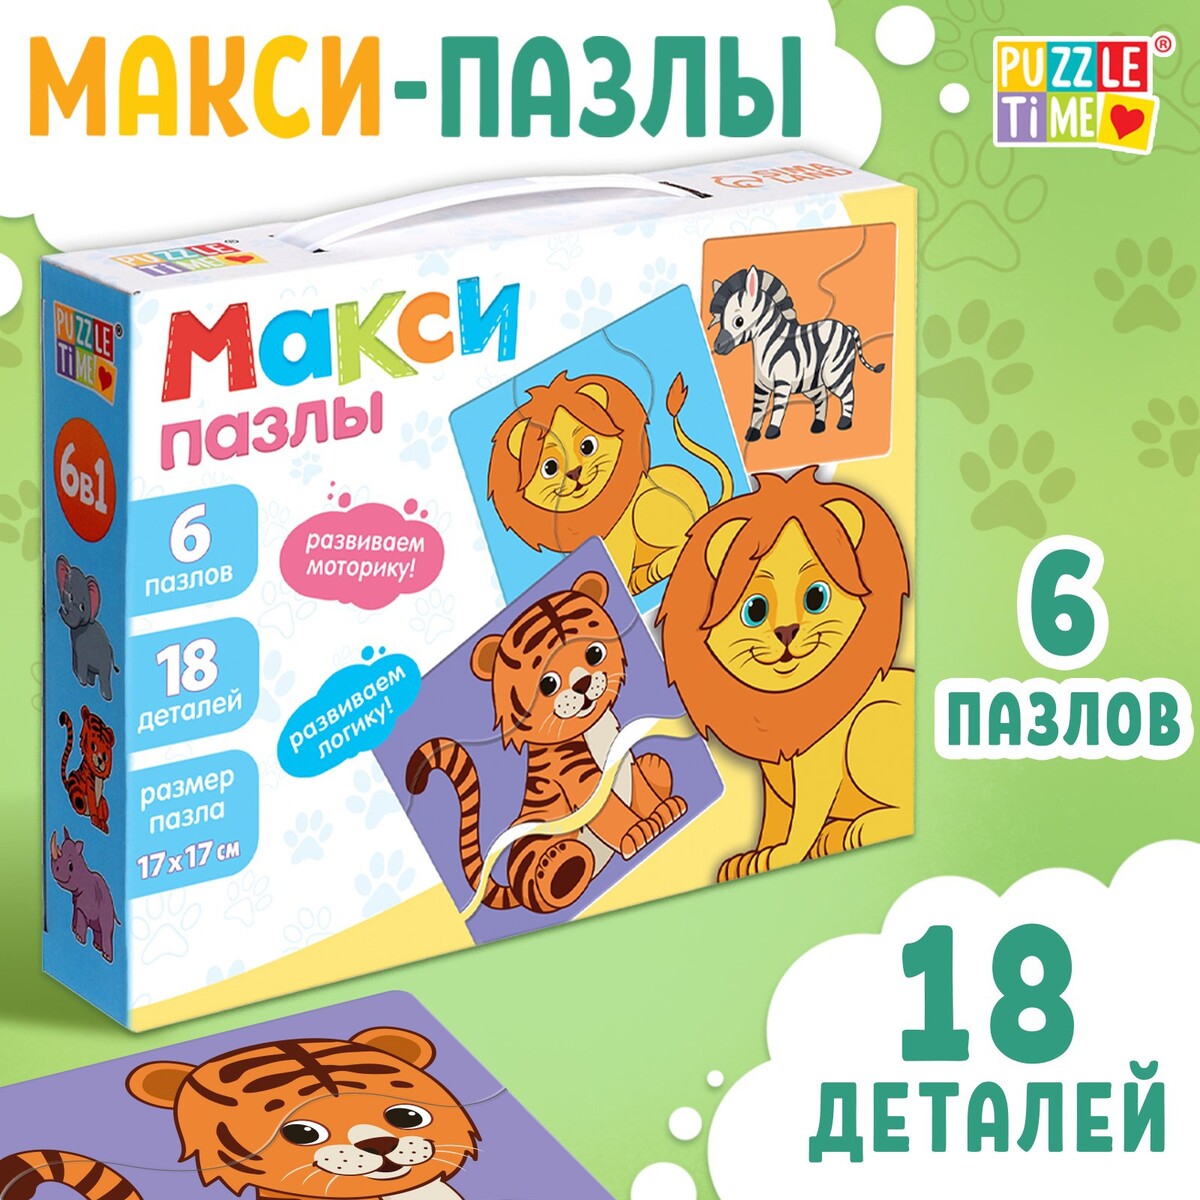 Макси-пазлы 6 в 1 Puzzle Time